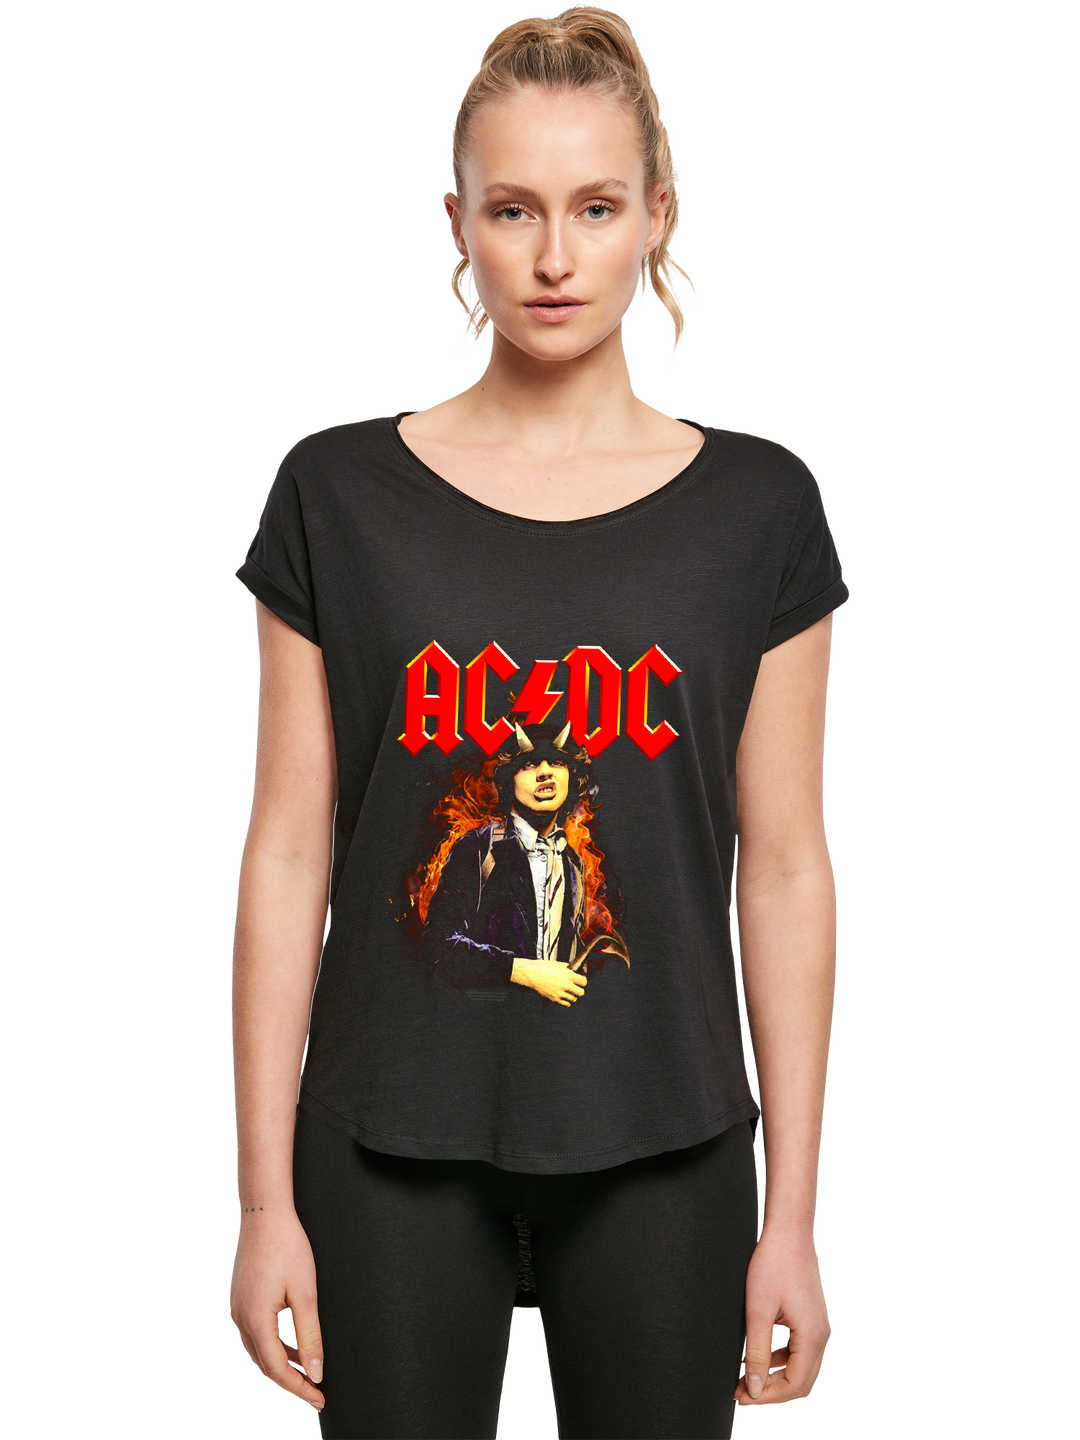 ACDC Angus Highway To Hell with Ladies Long Slub Tee